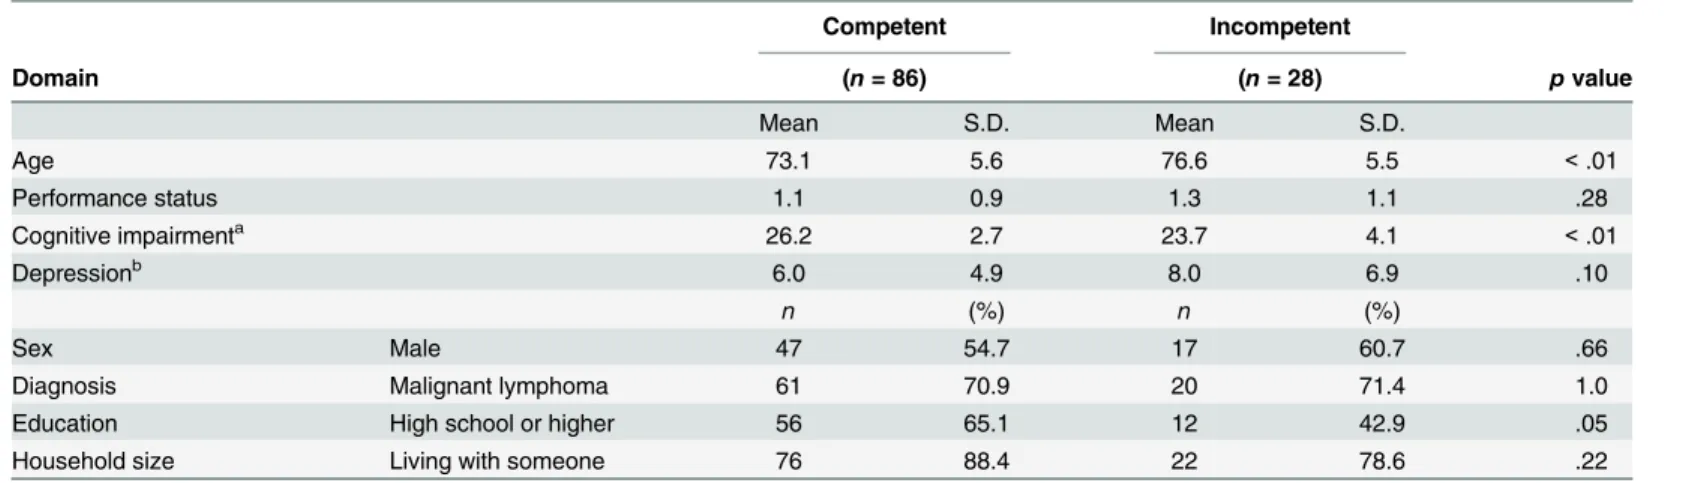 Table 3. Factors associated with incompetency: univariate analysis (n = 114).